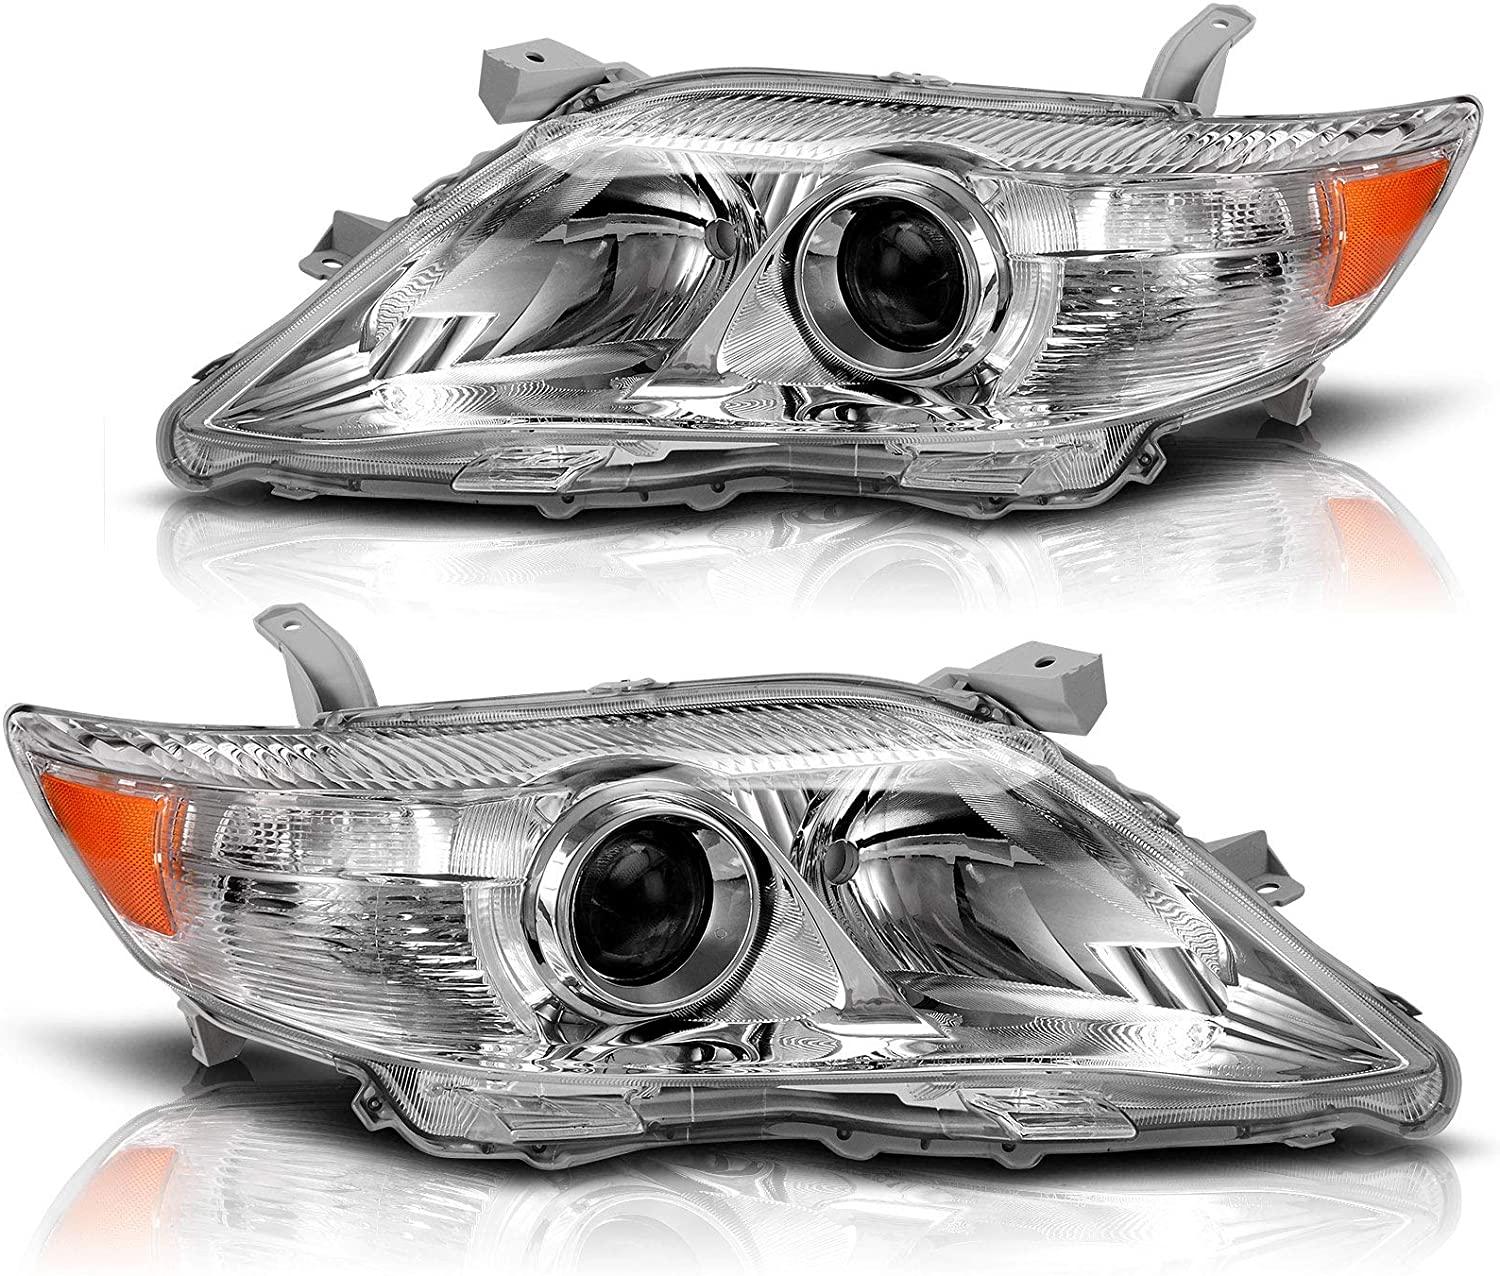 2010-2011 Toyota Camry Hybrid LED Headlights for Headlight Replacement –  YITAMotor